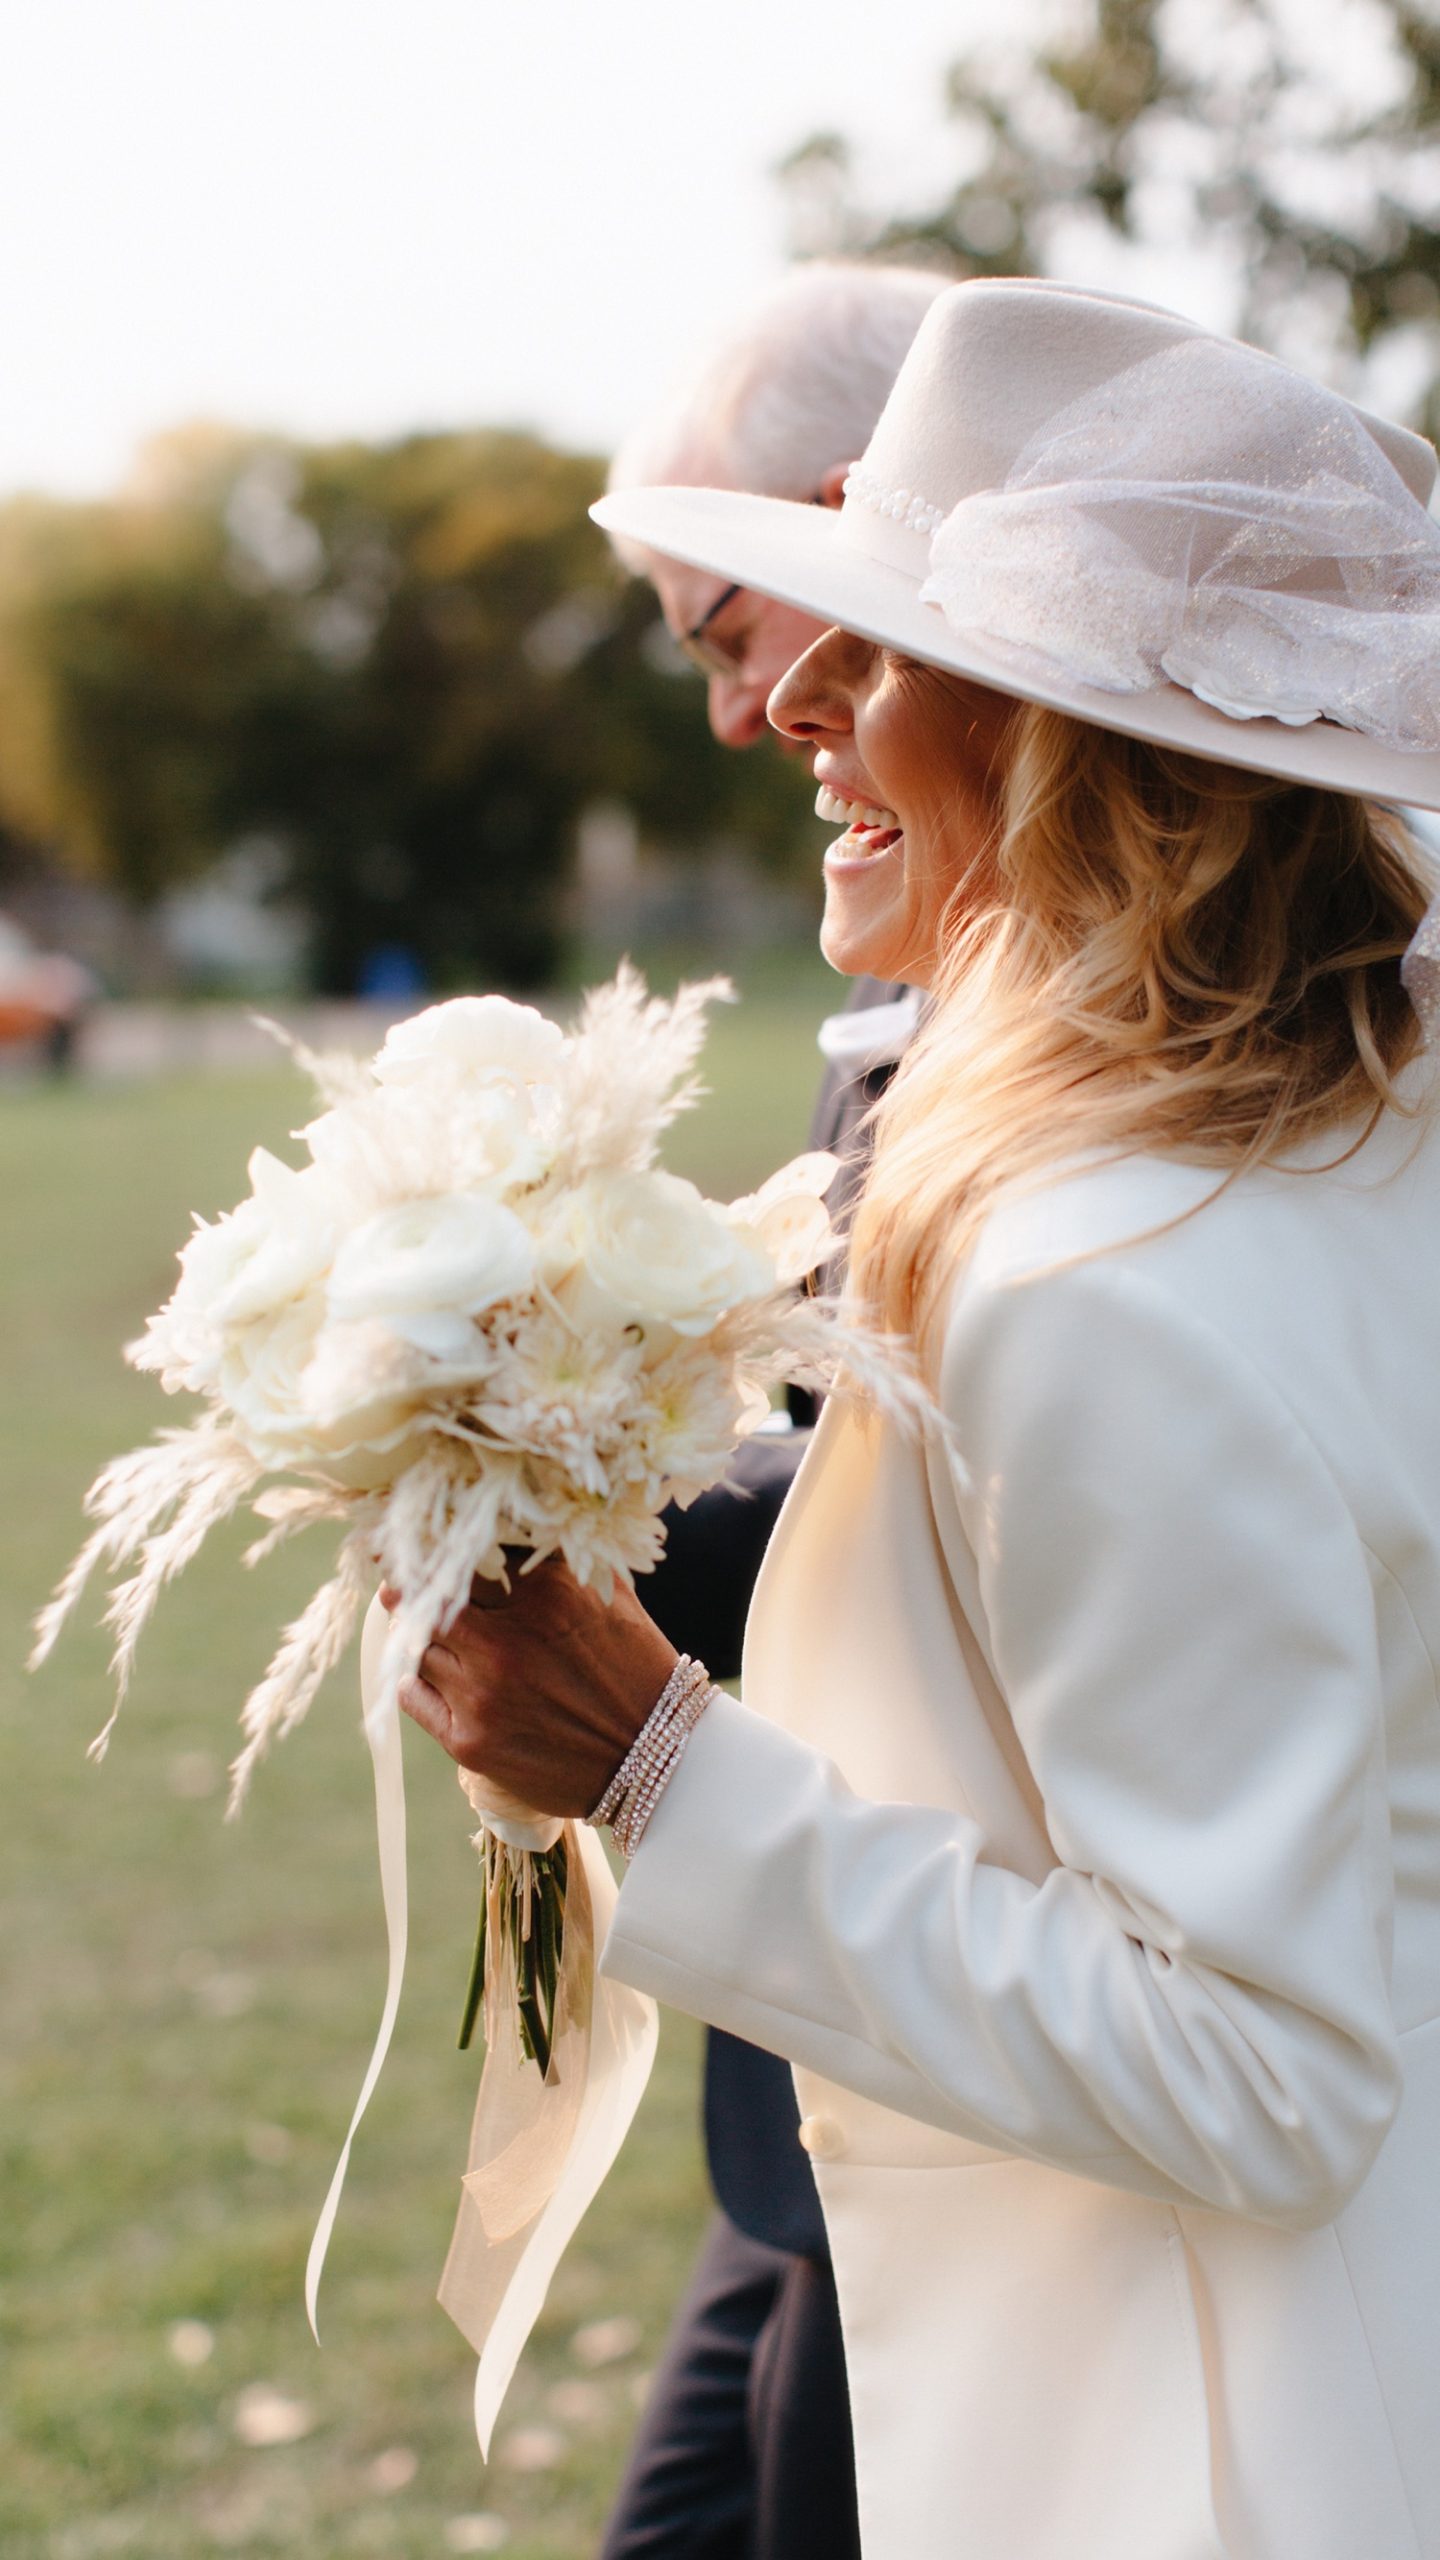 Impeccable mature bride style with pant suit, white bouquet and fascinator hat